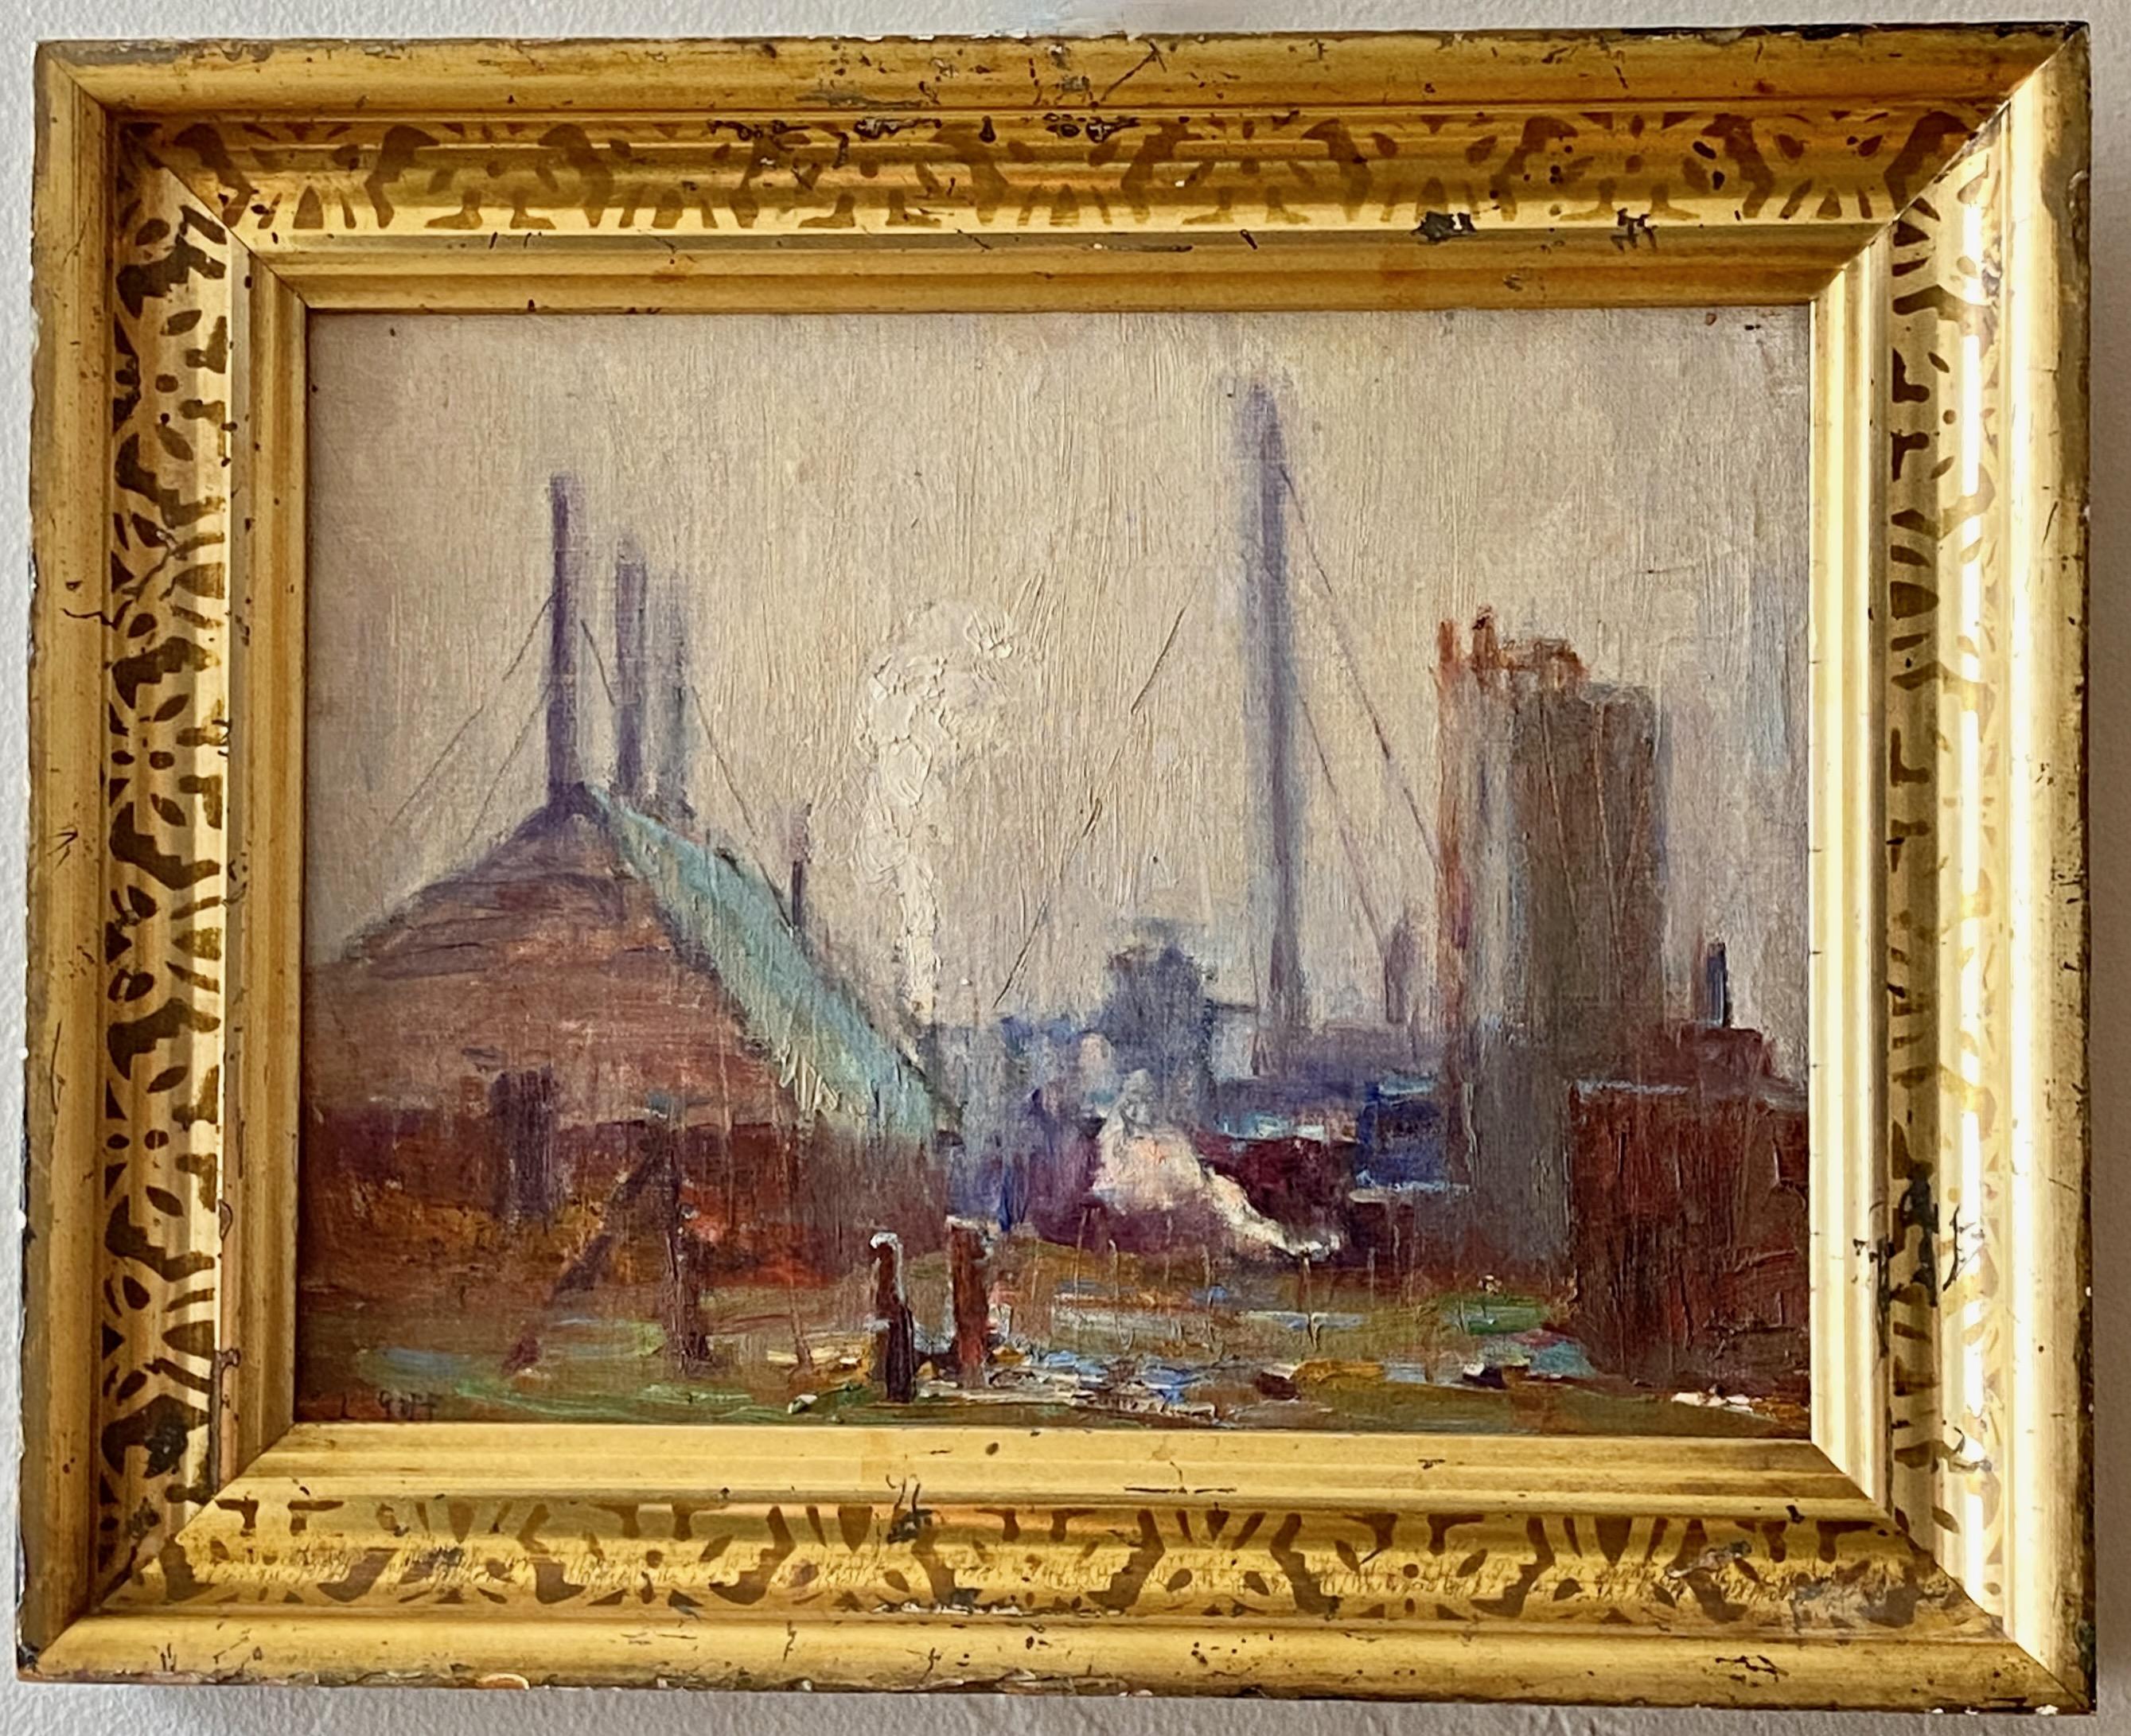 Lloyd Lozes Goff painting of a rural industrial landscape in gilt wood frame.  
Signed oil on board.

Lloyd Lozes Goff (1908–1982) was an American painter. Goff was born in 1908 in Dallas, Texas. He studied at the Art Students League and the